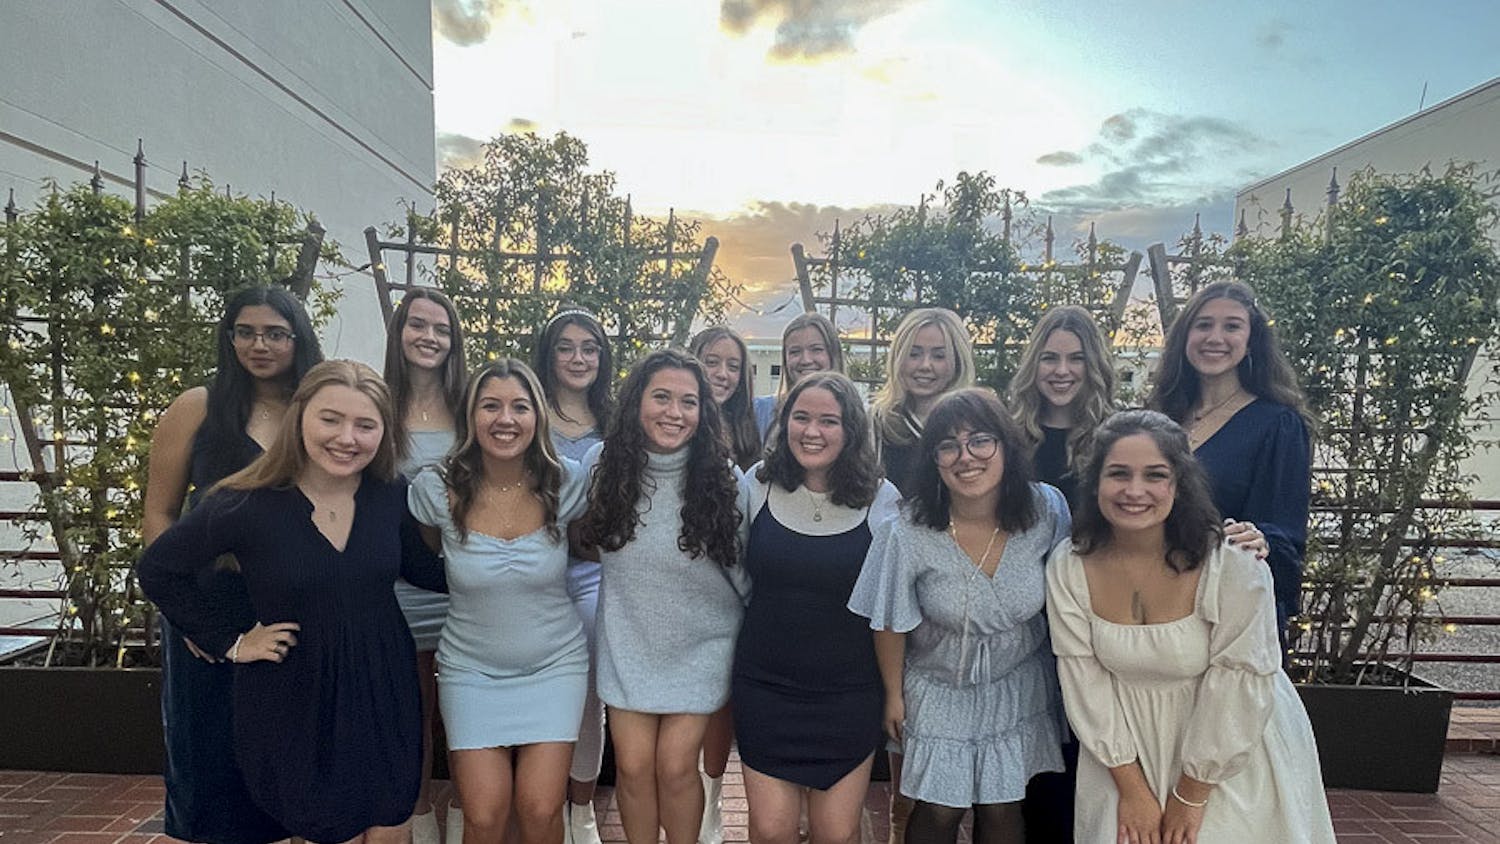 Members of The Cocktails pose outside of the Koger Center for the Arts after their winter recital on Dec. 2, 2022. The all-female a capella group is organized and ran by students who perform live events around Columbia and release their content online.